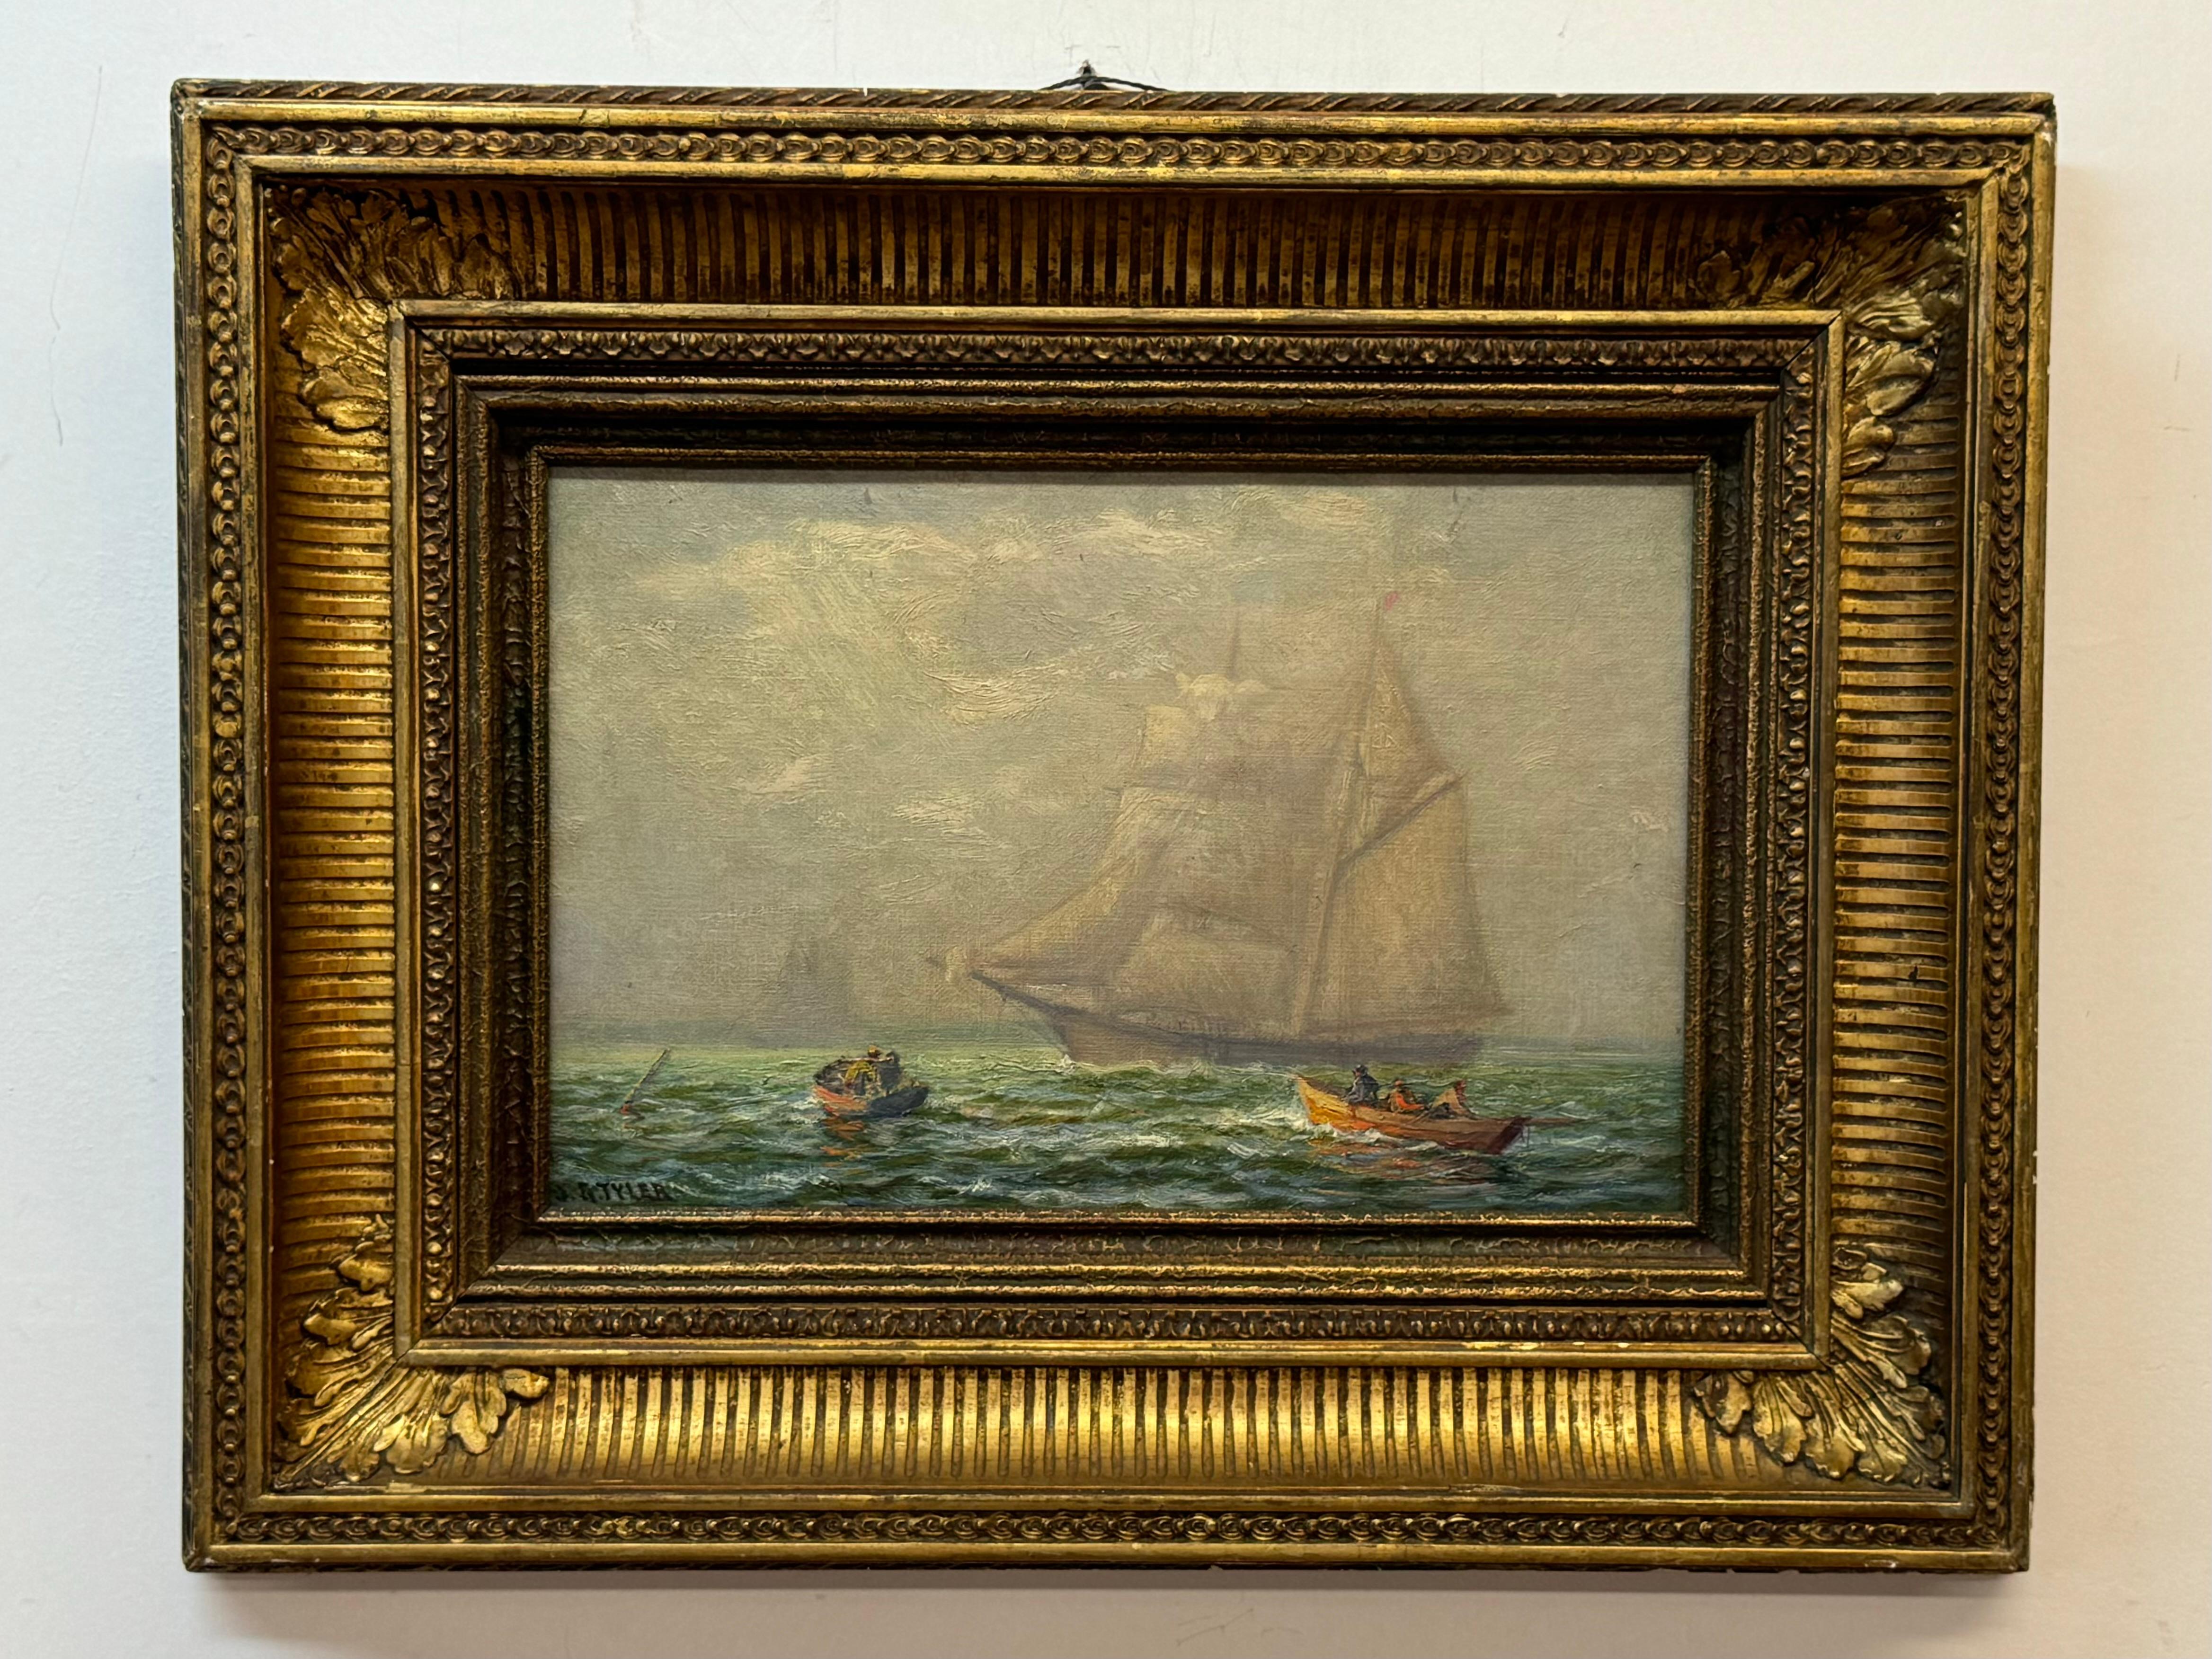 J.G. Tyler late 19th century Seascape with ship and boats. Oil on canvas board. 8 x 12 unframed, 14.75 x 18.5 framed.